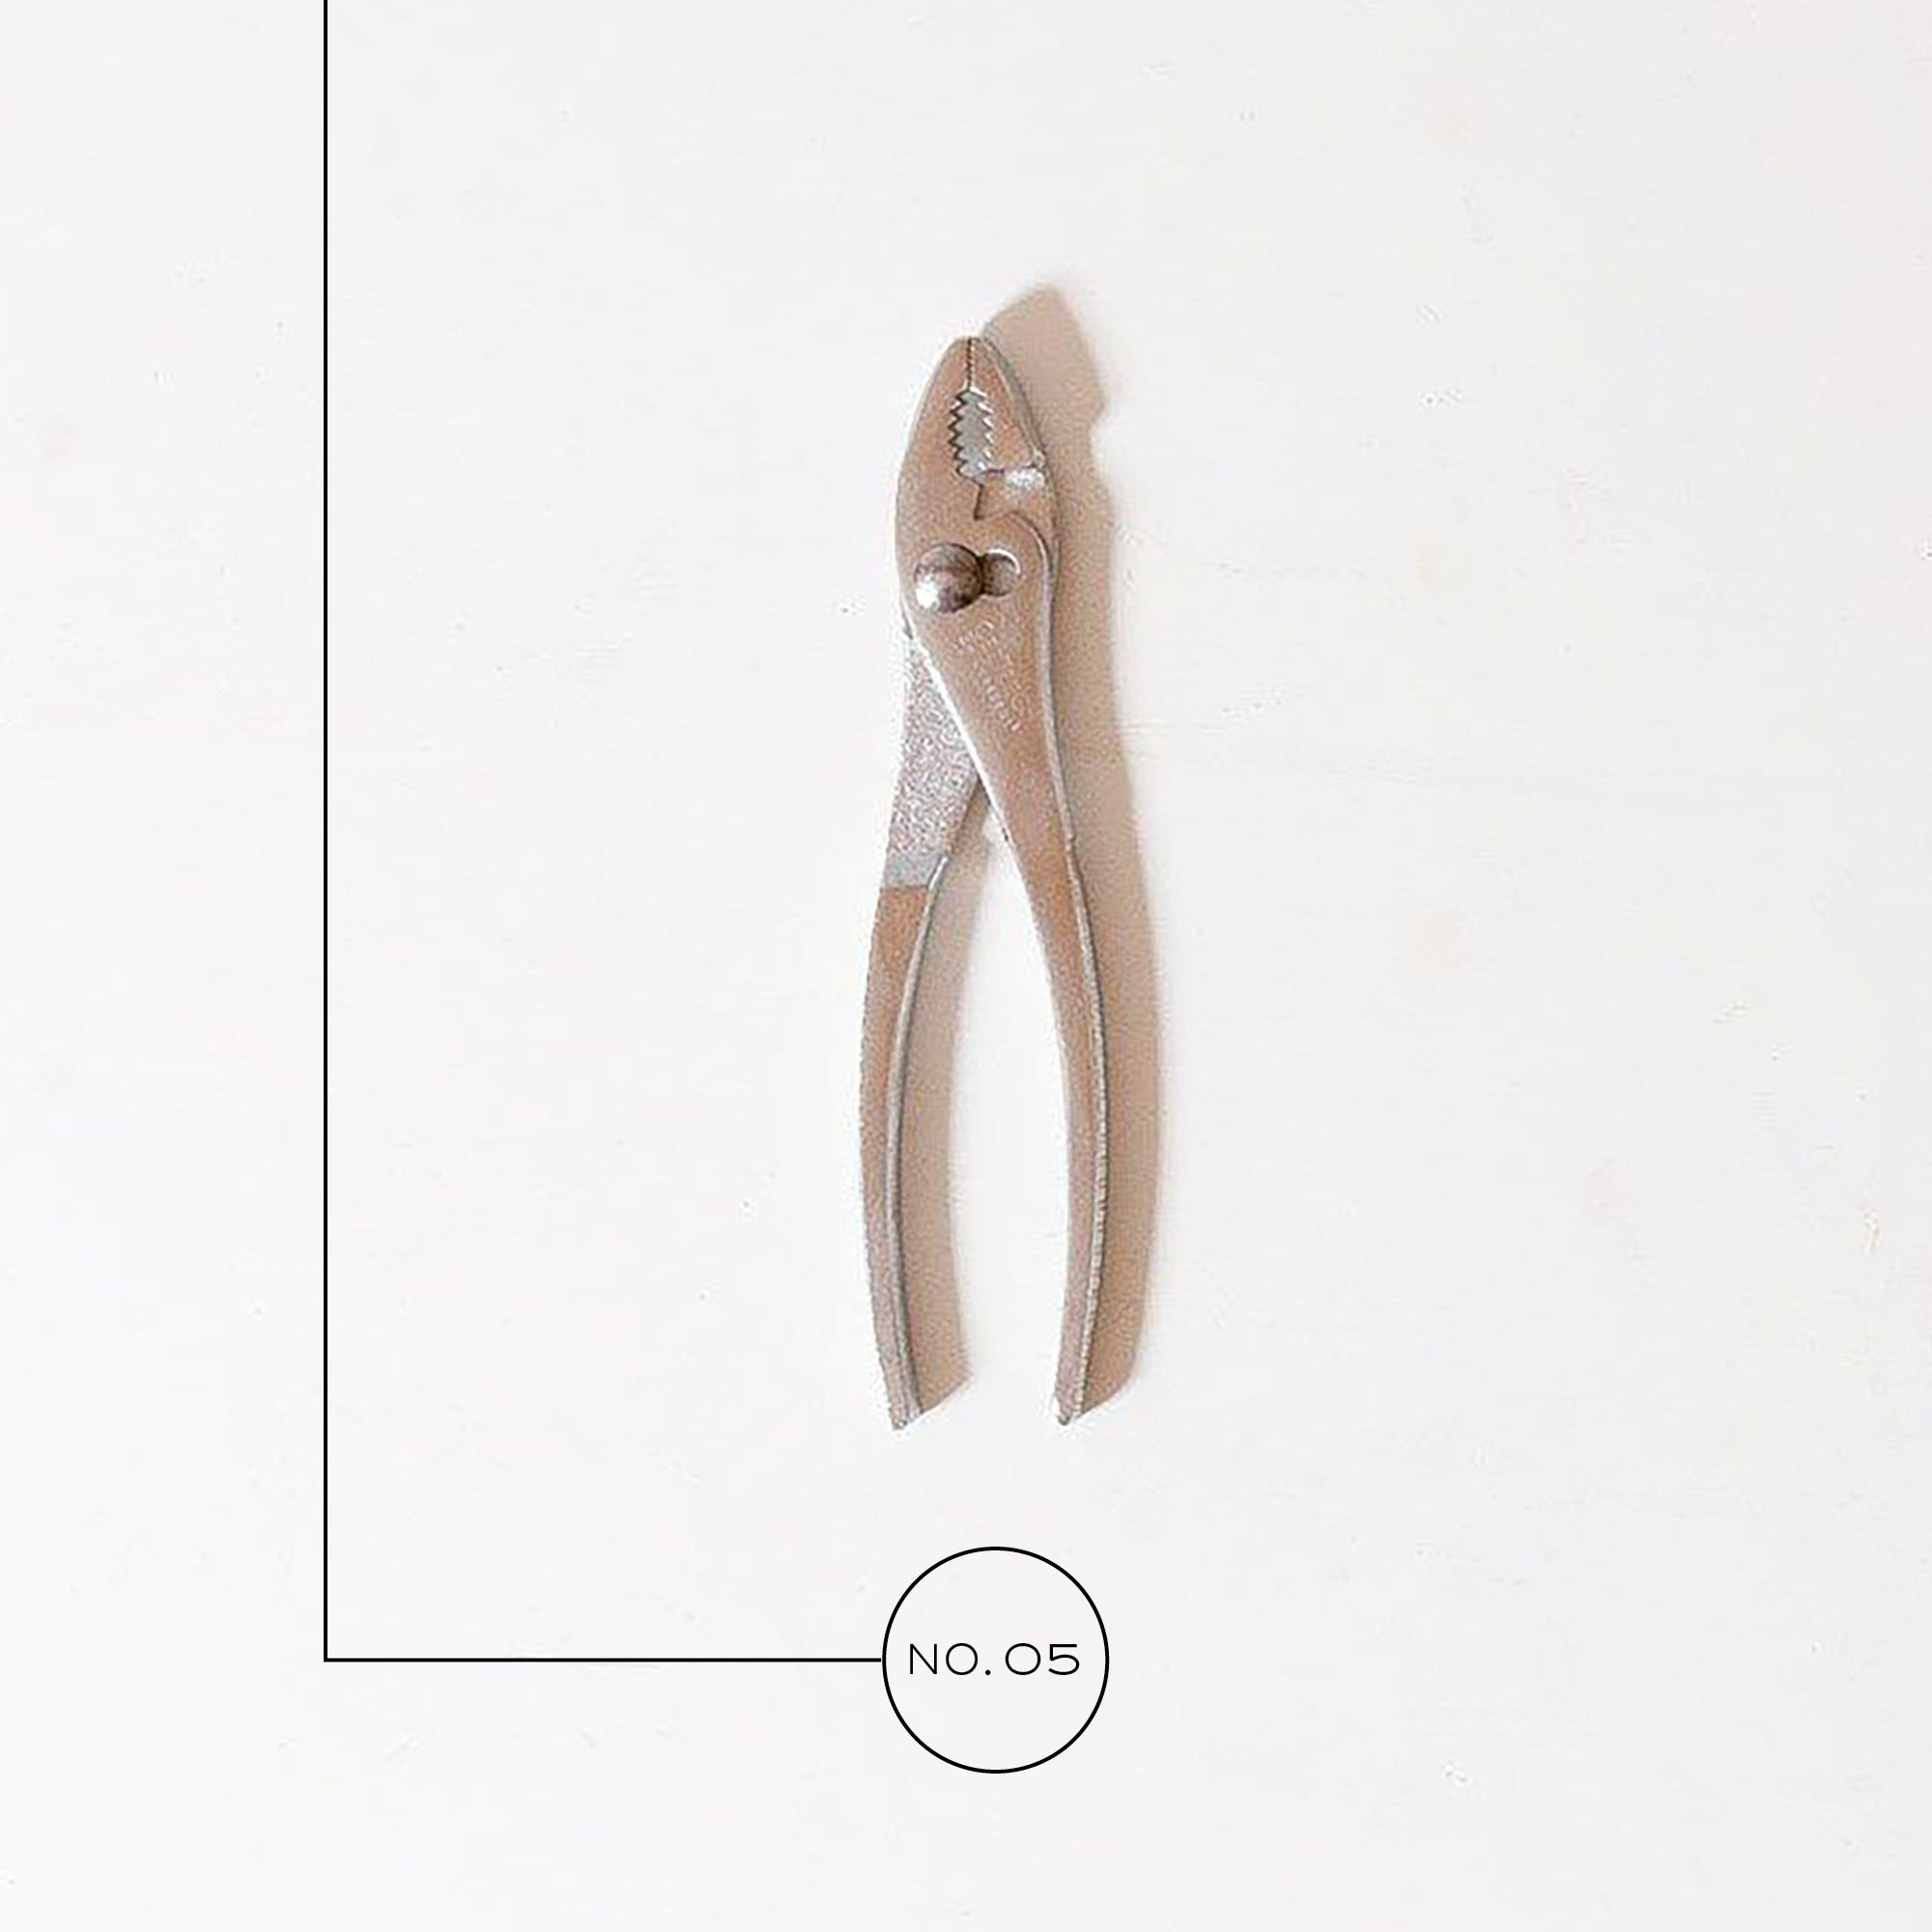 A photo of pliers on a white background.